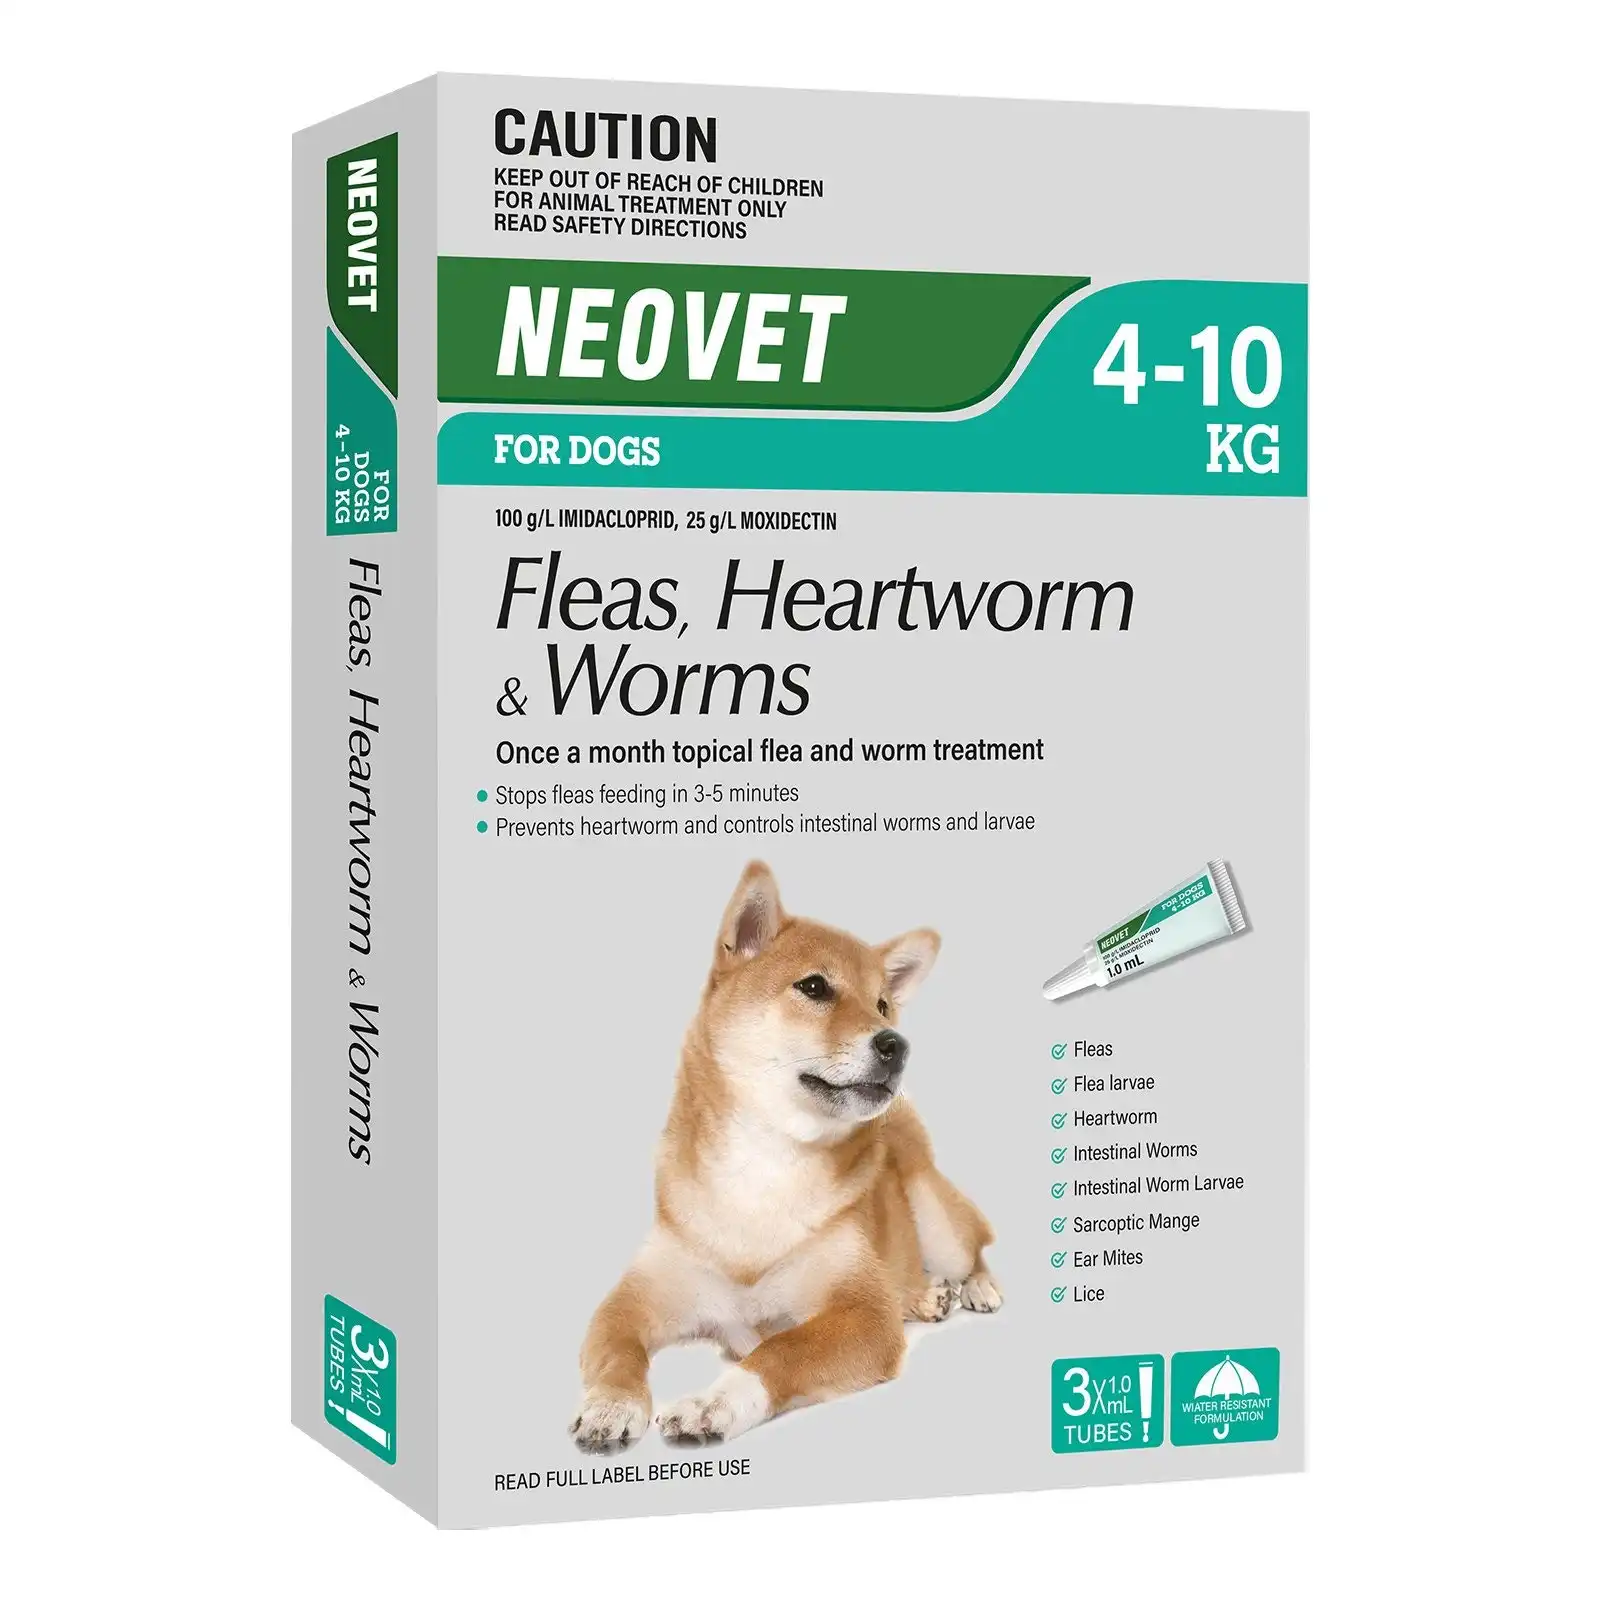 Neovet - Generic Advocate for Dogs 4 to 10 Kg (AQUA)3 Pack